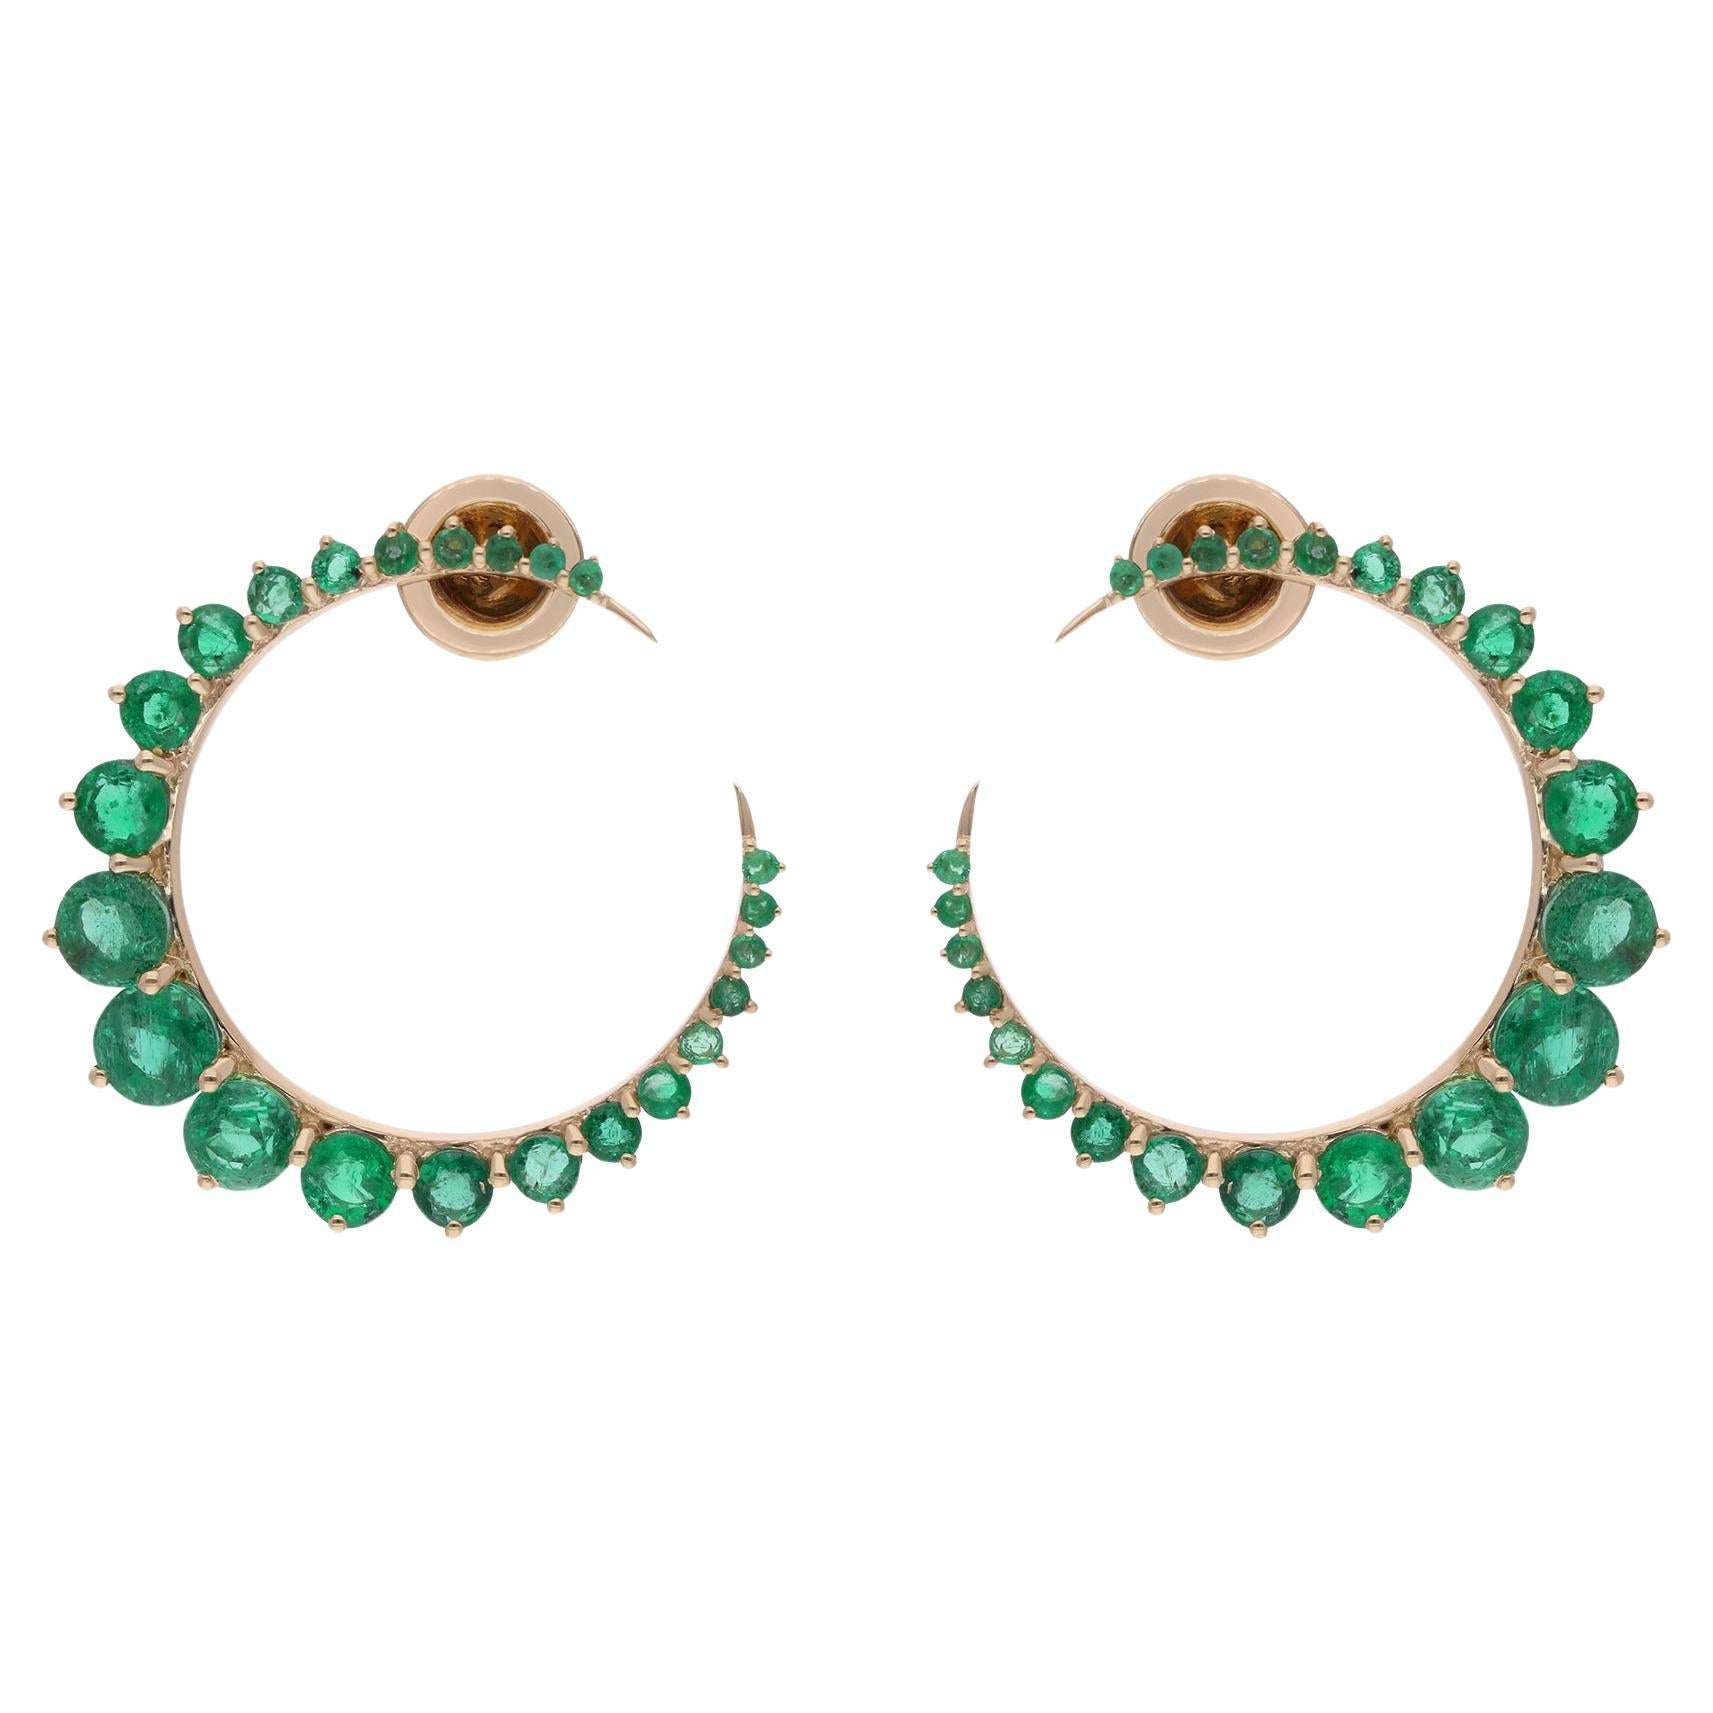 Real Zambian Emerald Gemstone Crescent Moon Earrings 18 Karat Solid Yellow Gold For Sale